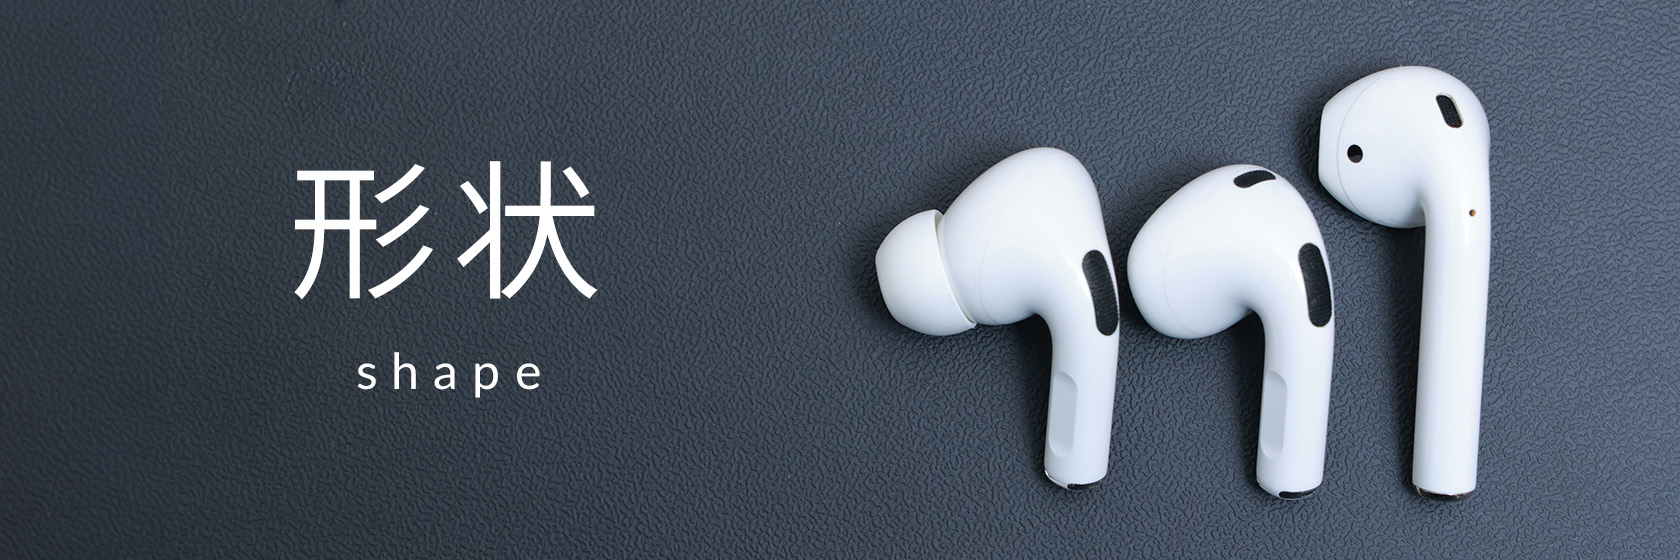 AirPods と AirPods Pro の違い：形状